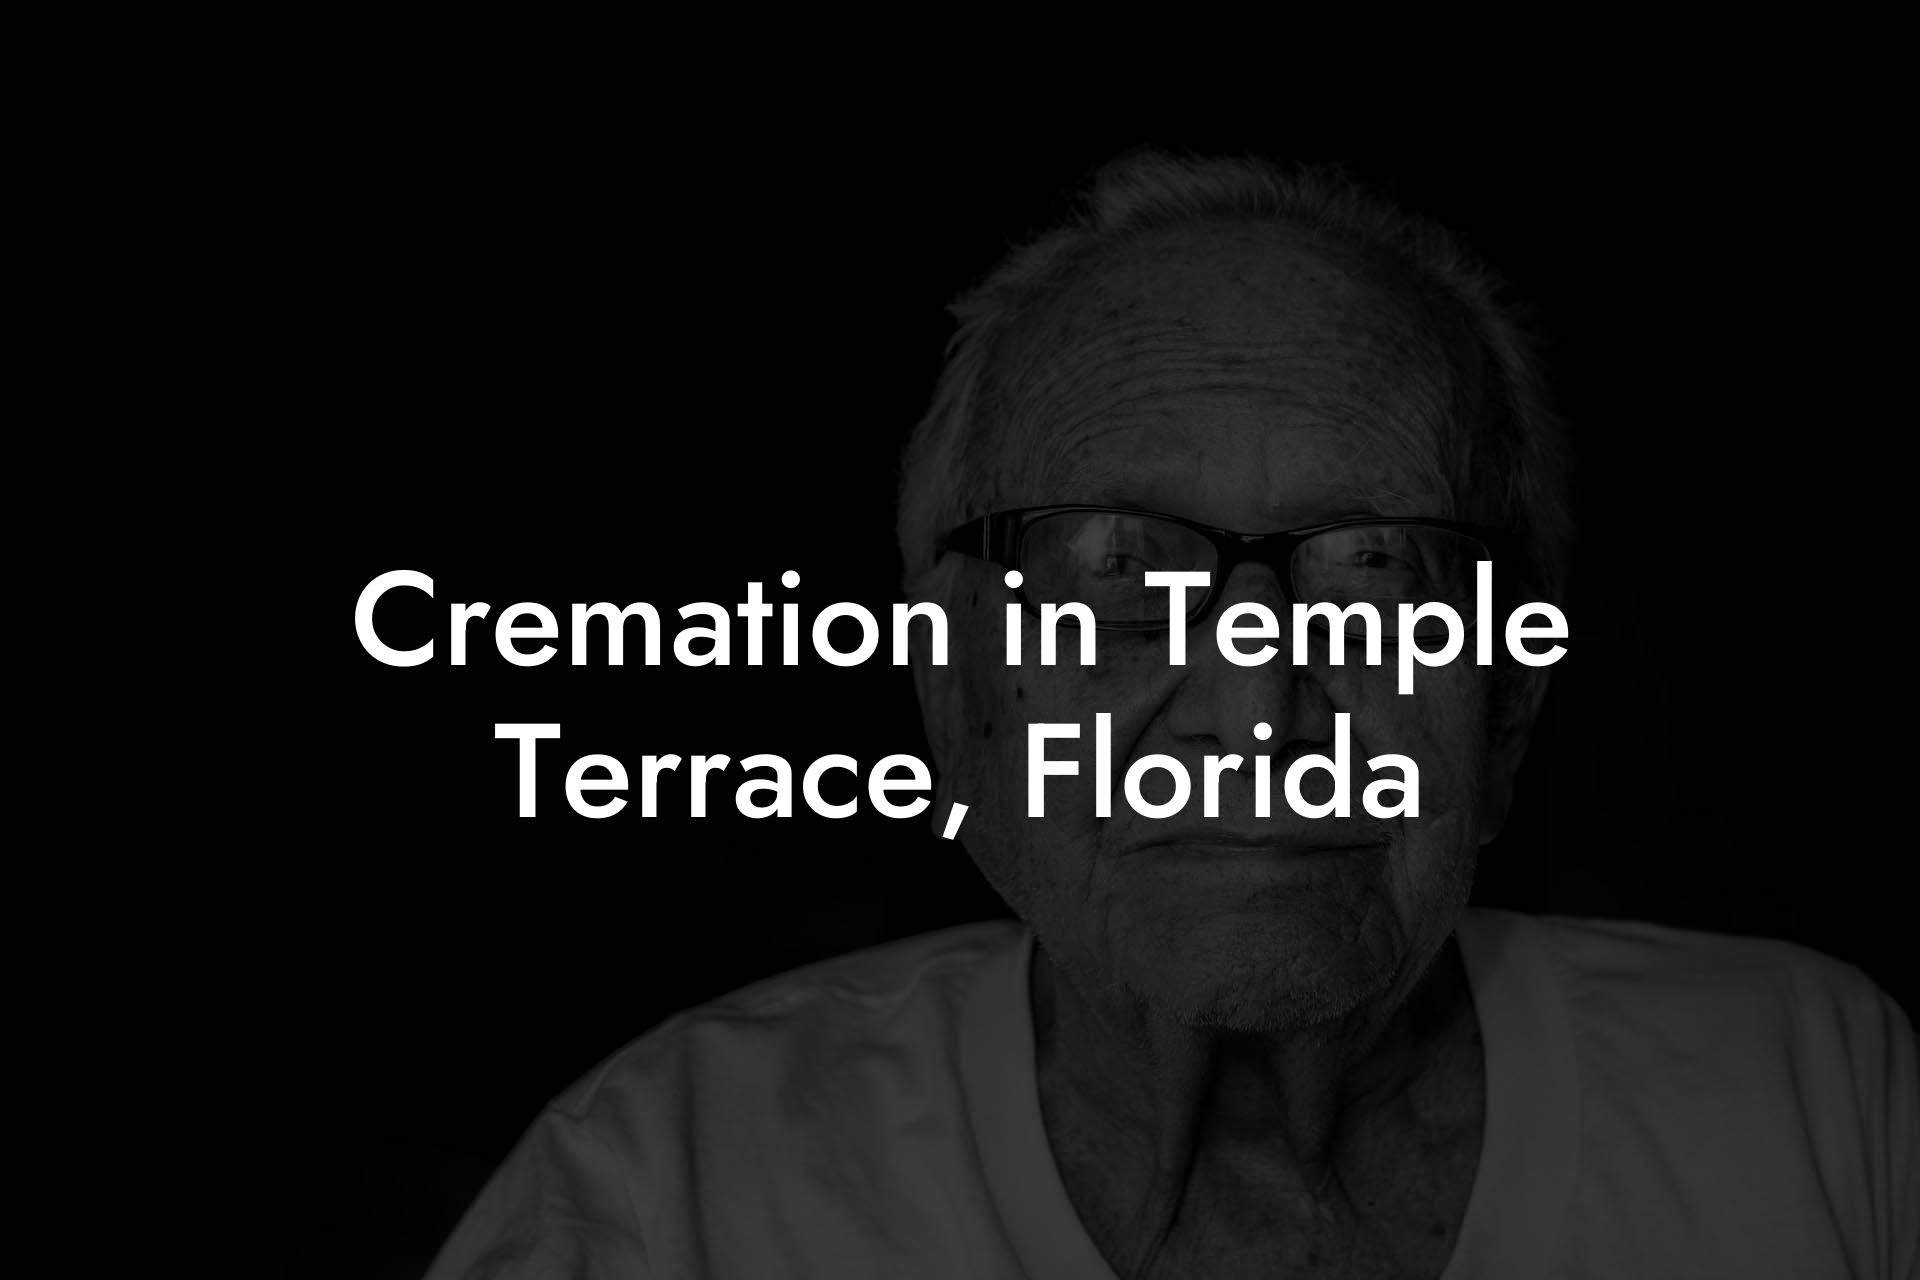 Cremation in Temple Terrace, Florida